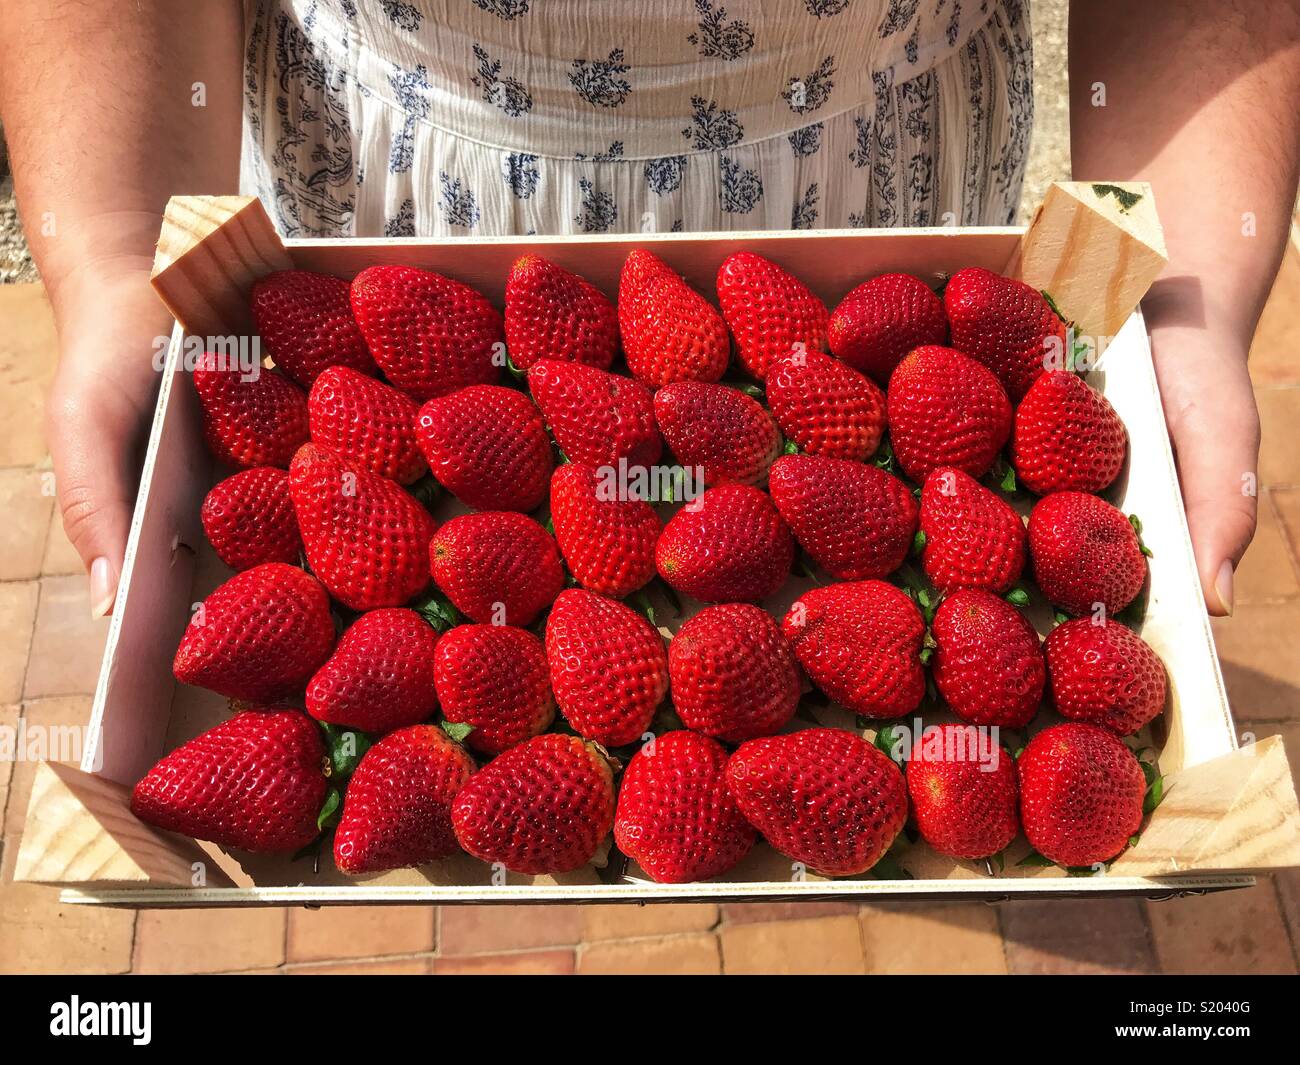 Millennial woman holding a box of fresh, ripe, red strawberries, high angle view Stock Photo